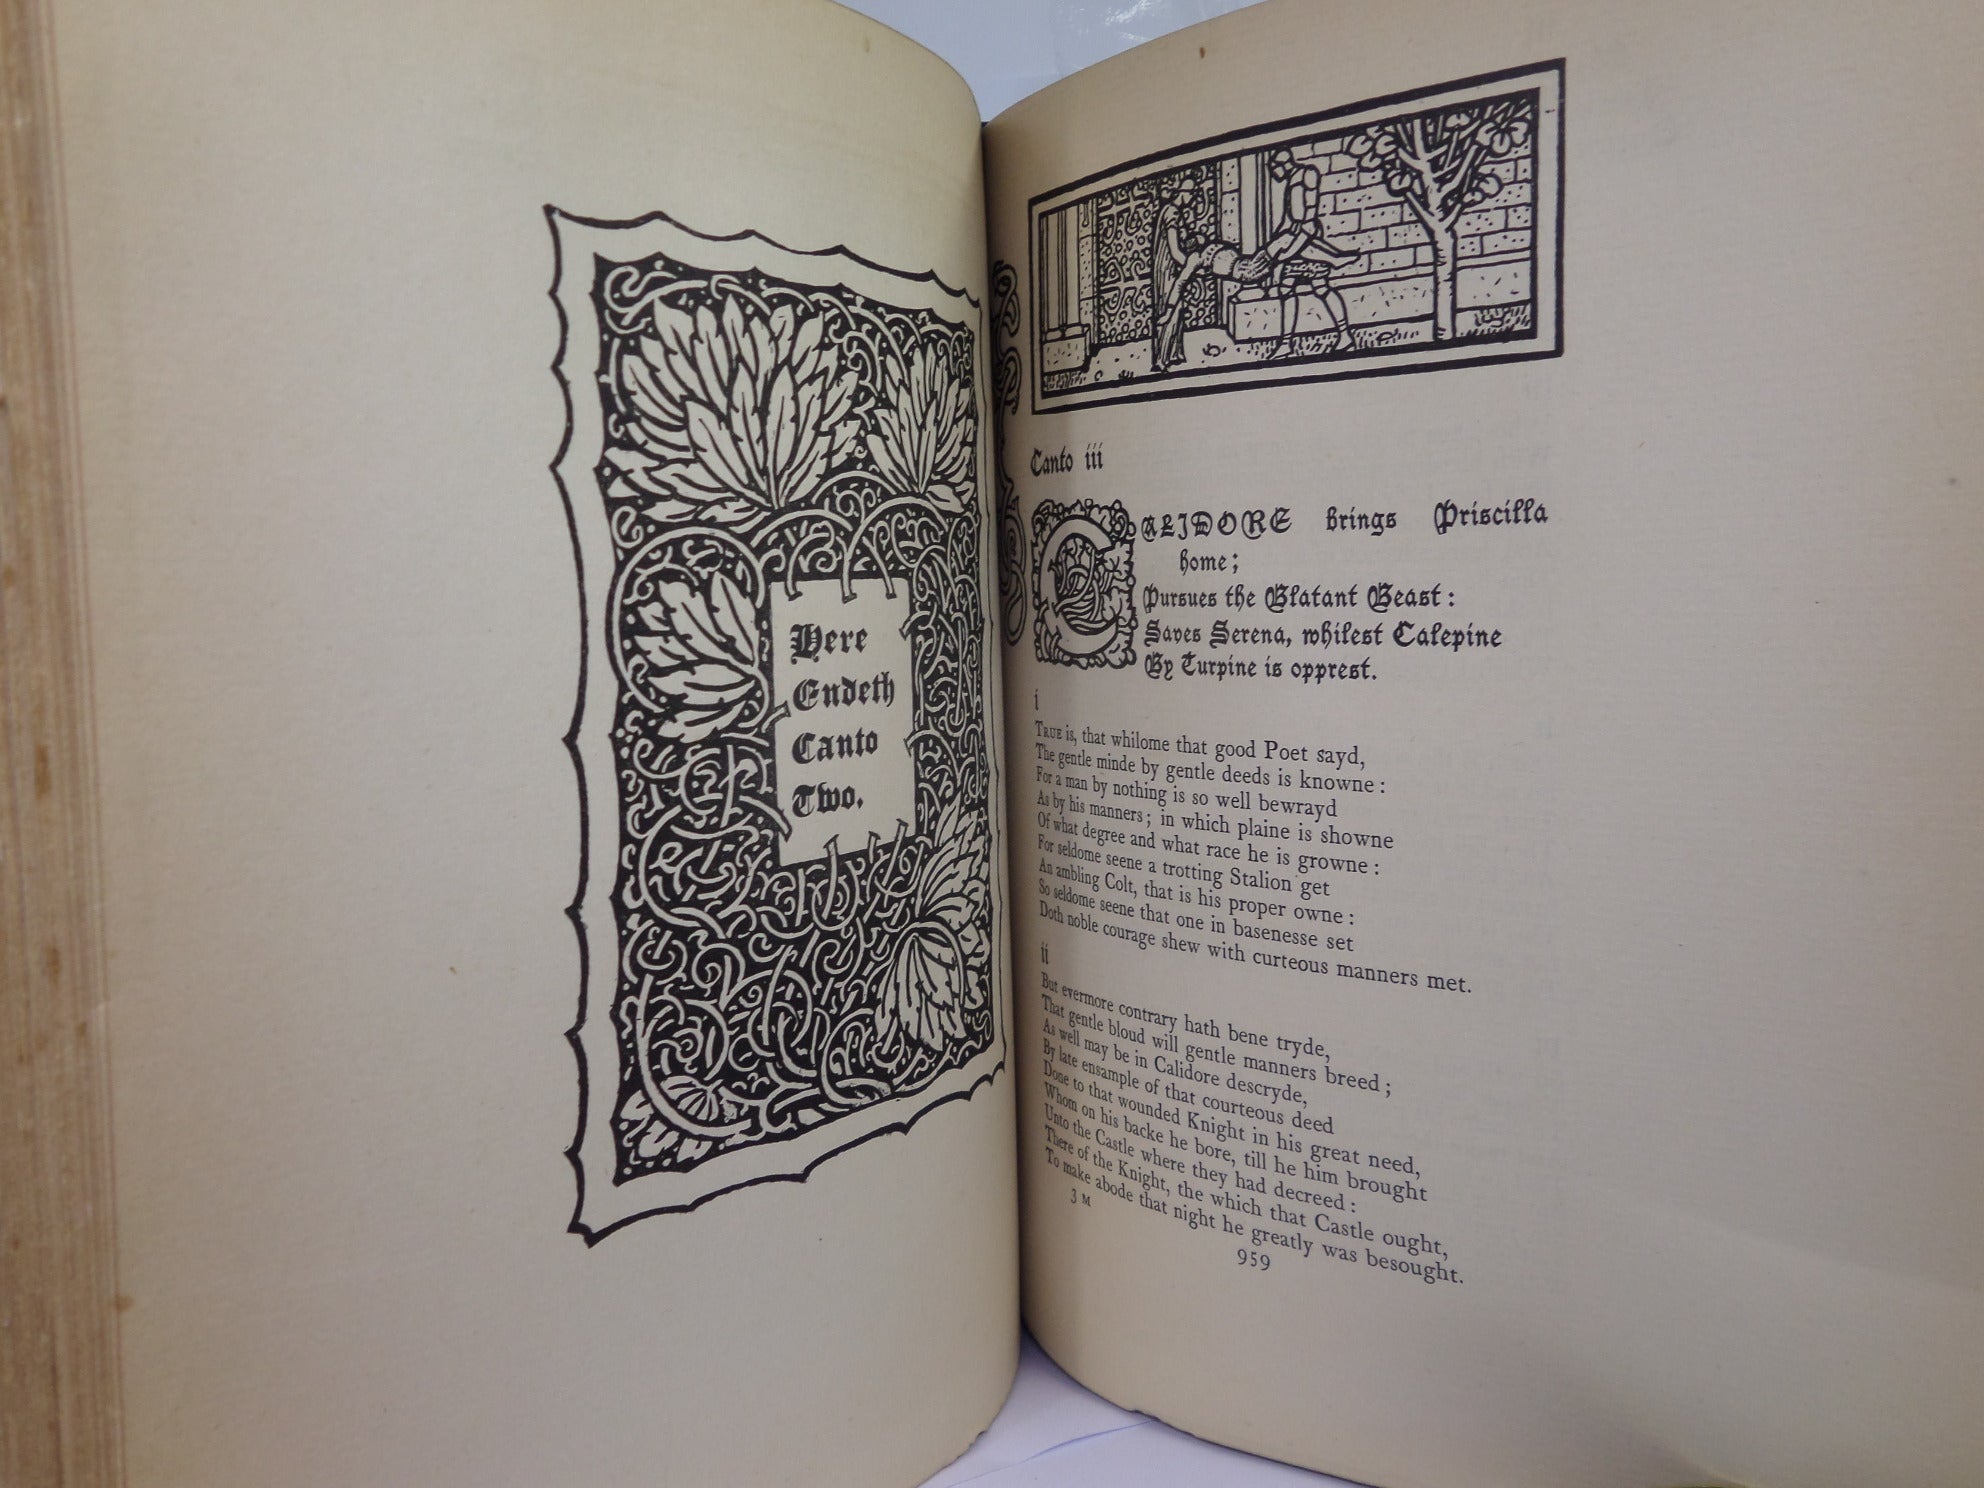 THE FAERIE QUEENE BY EDMUND SPENSER 1897 ILLUSTRATED BY LOVIS FAIRFAX-MUCKLEY, LIMITED EDITION IN TWO VOLS